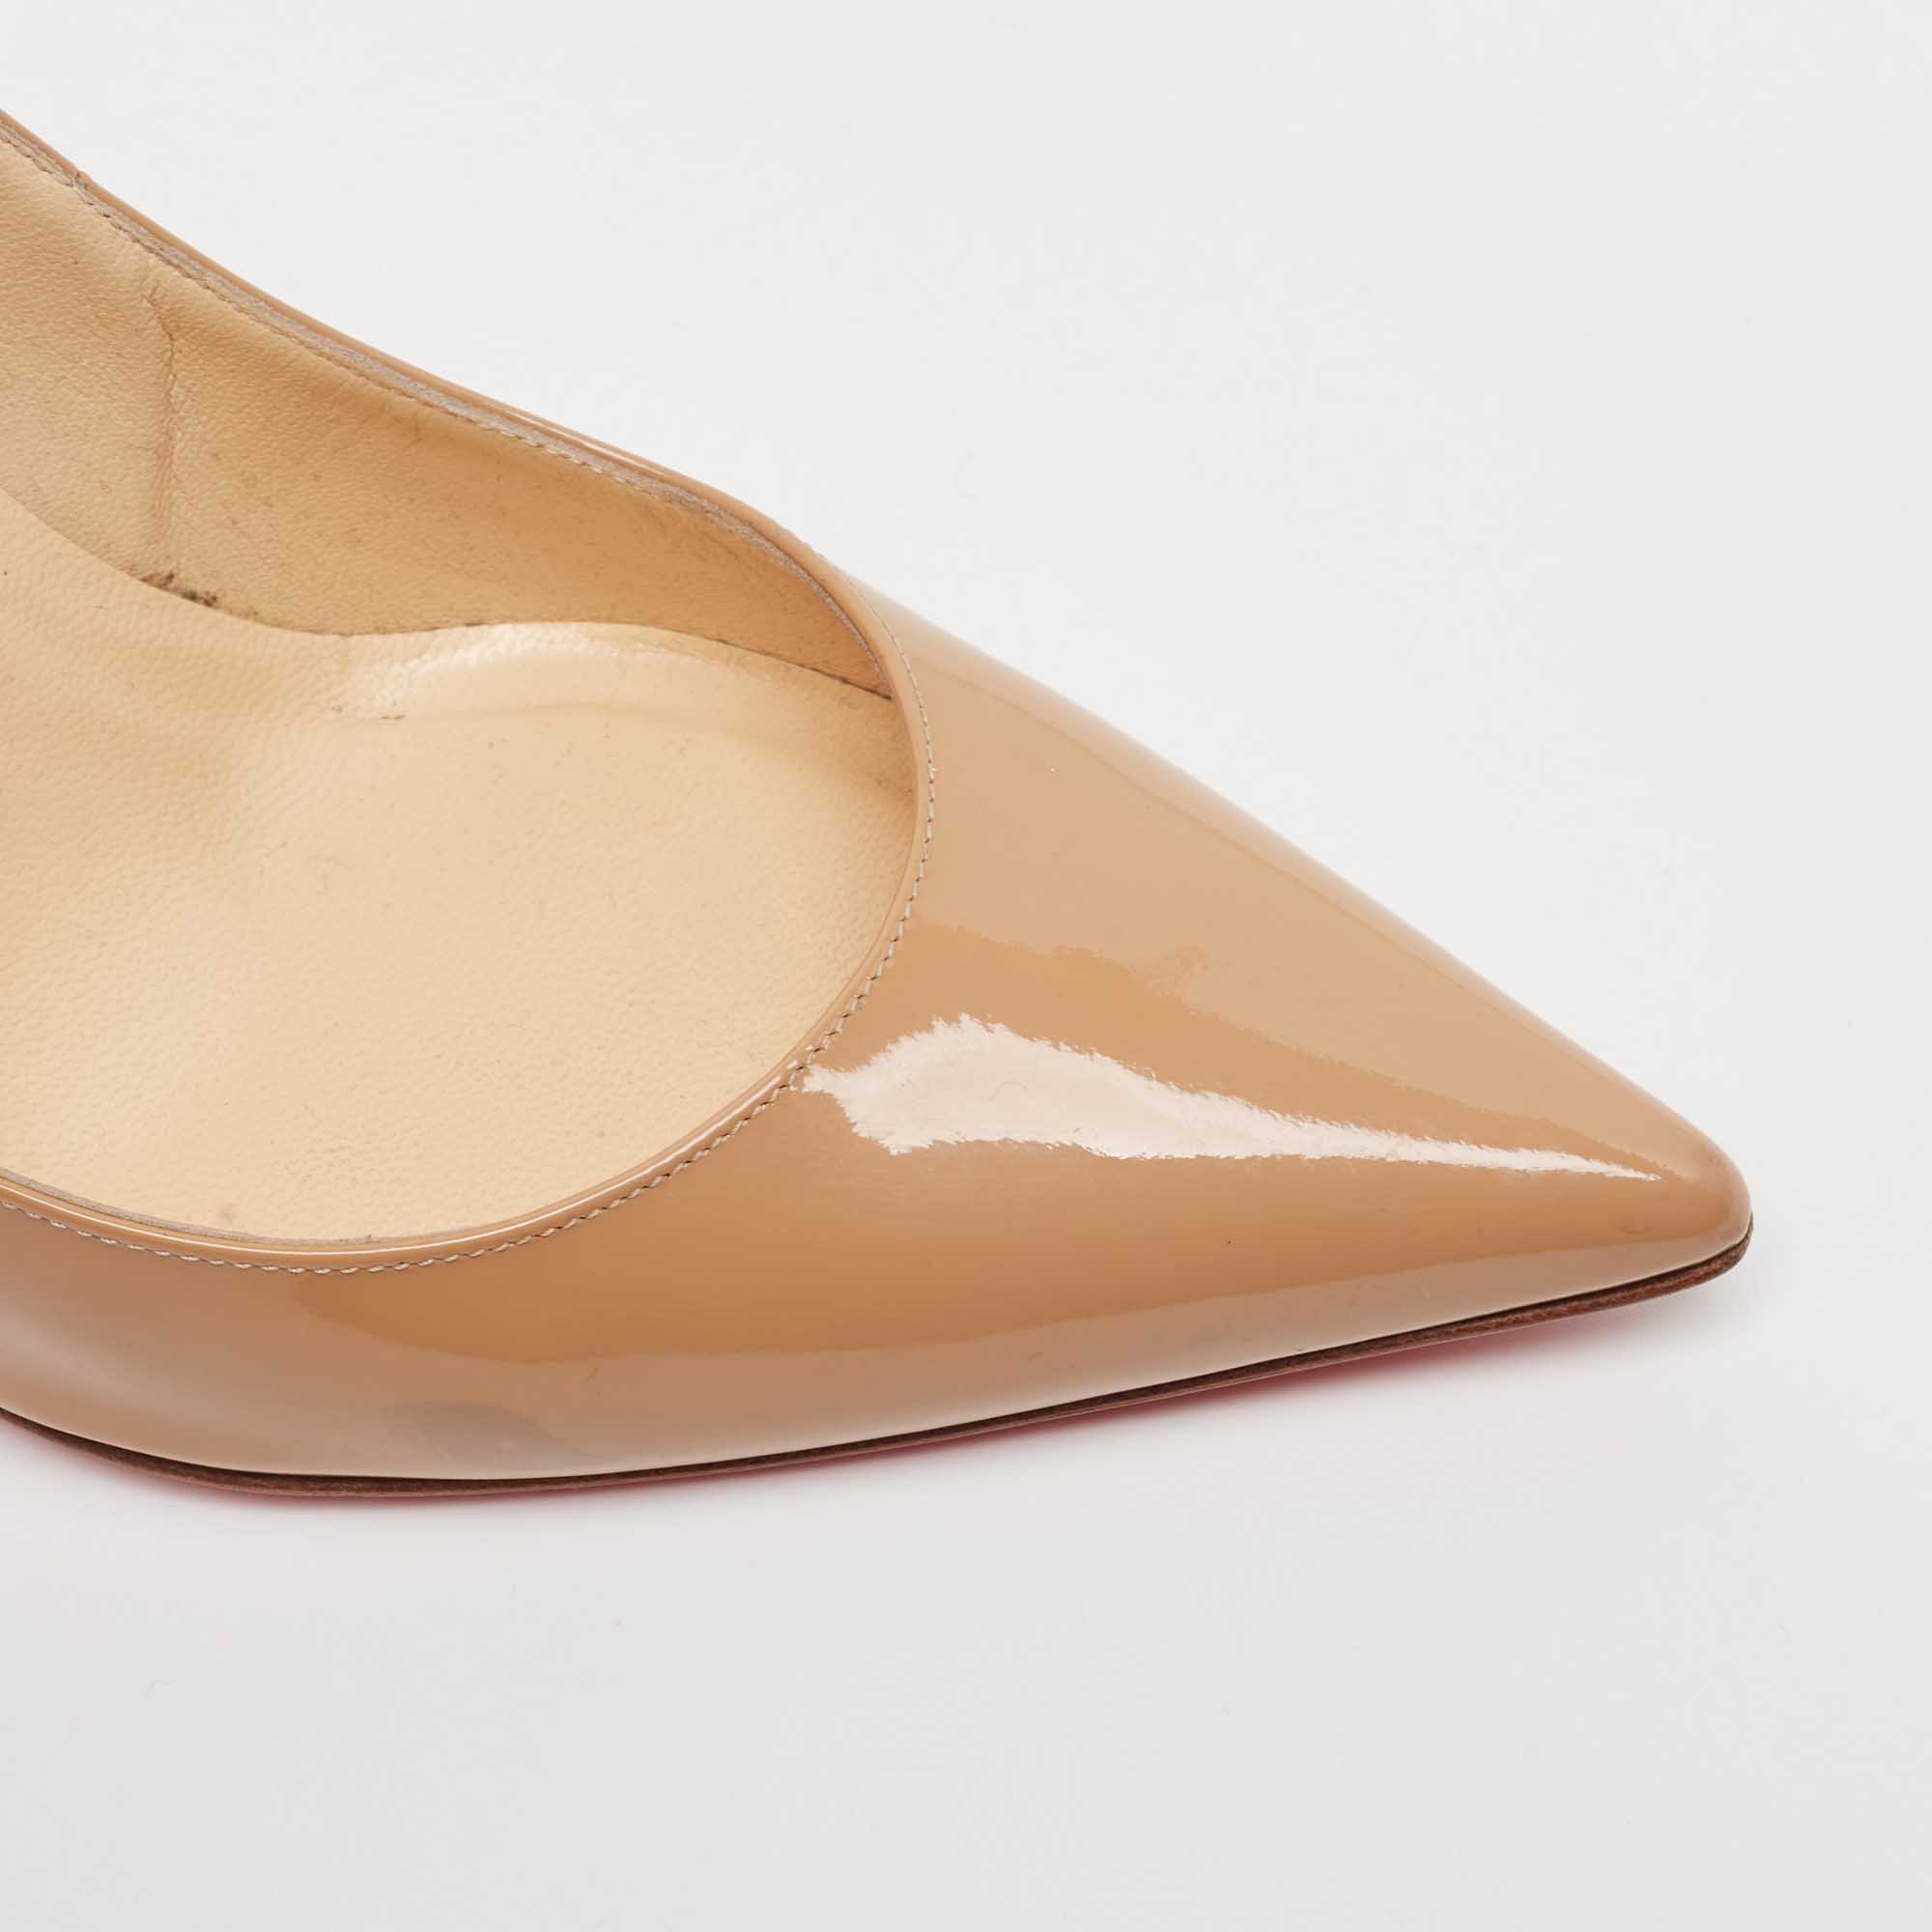 Christian Louboutin Beige Patent Leather So Kate Pumps Size 37